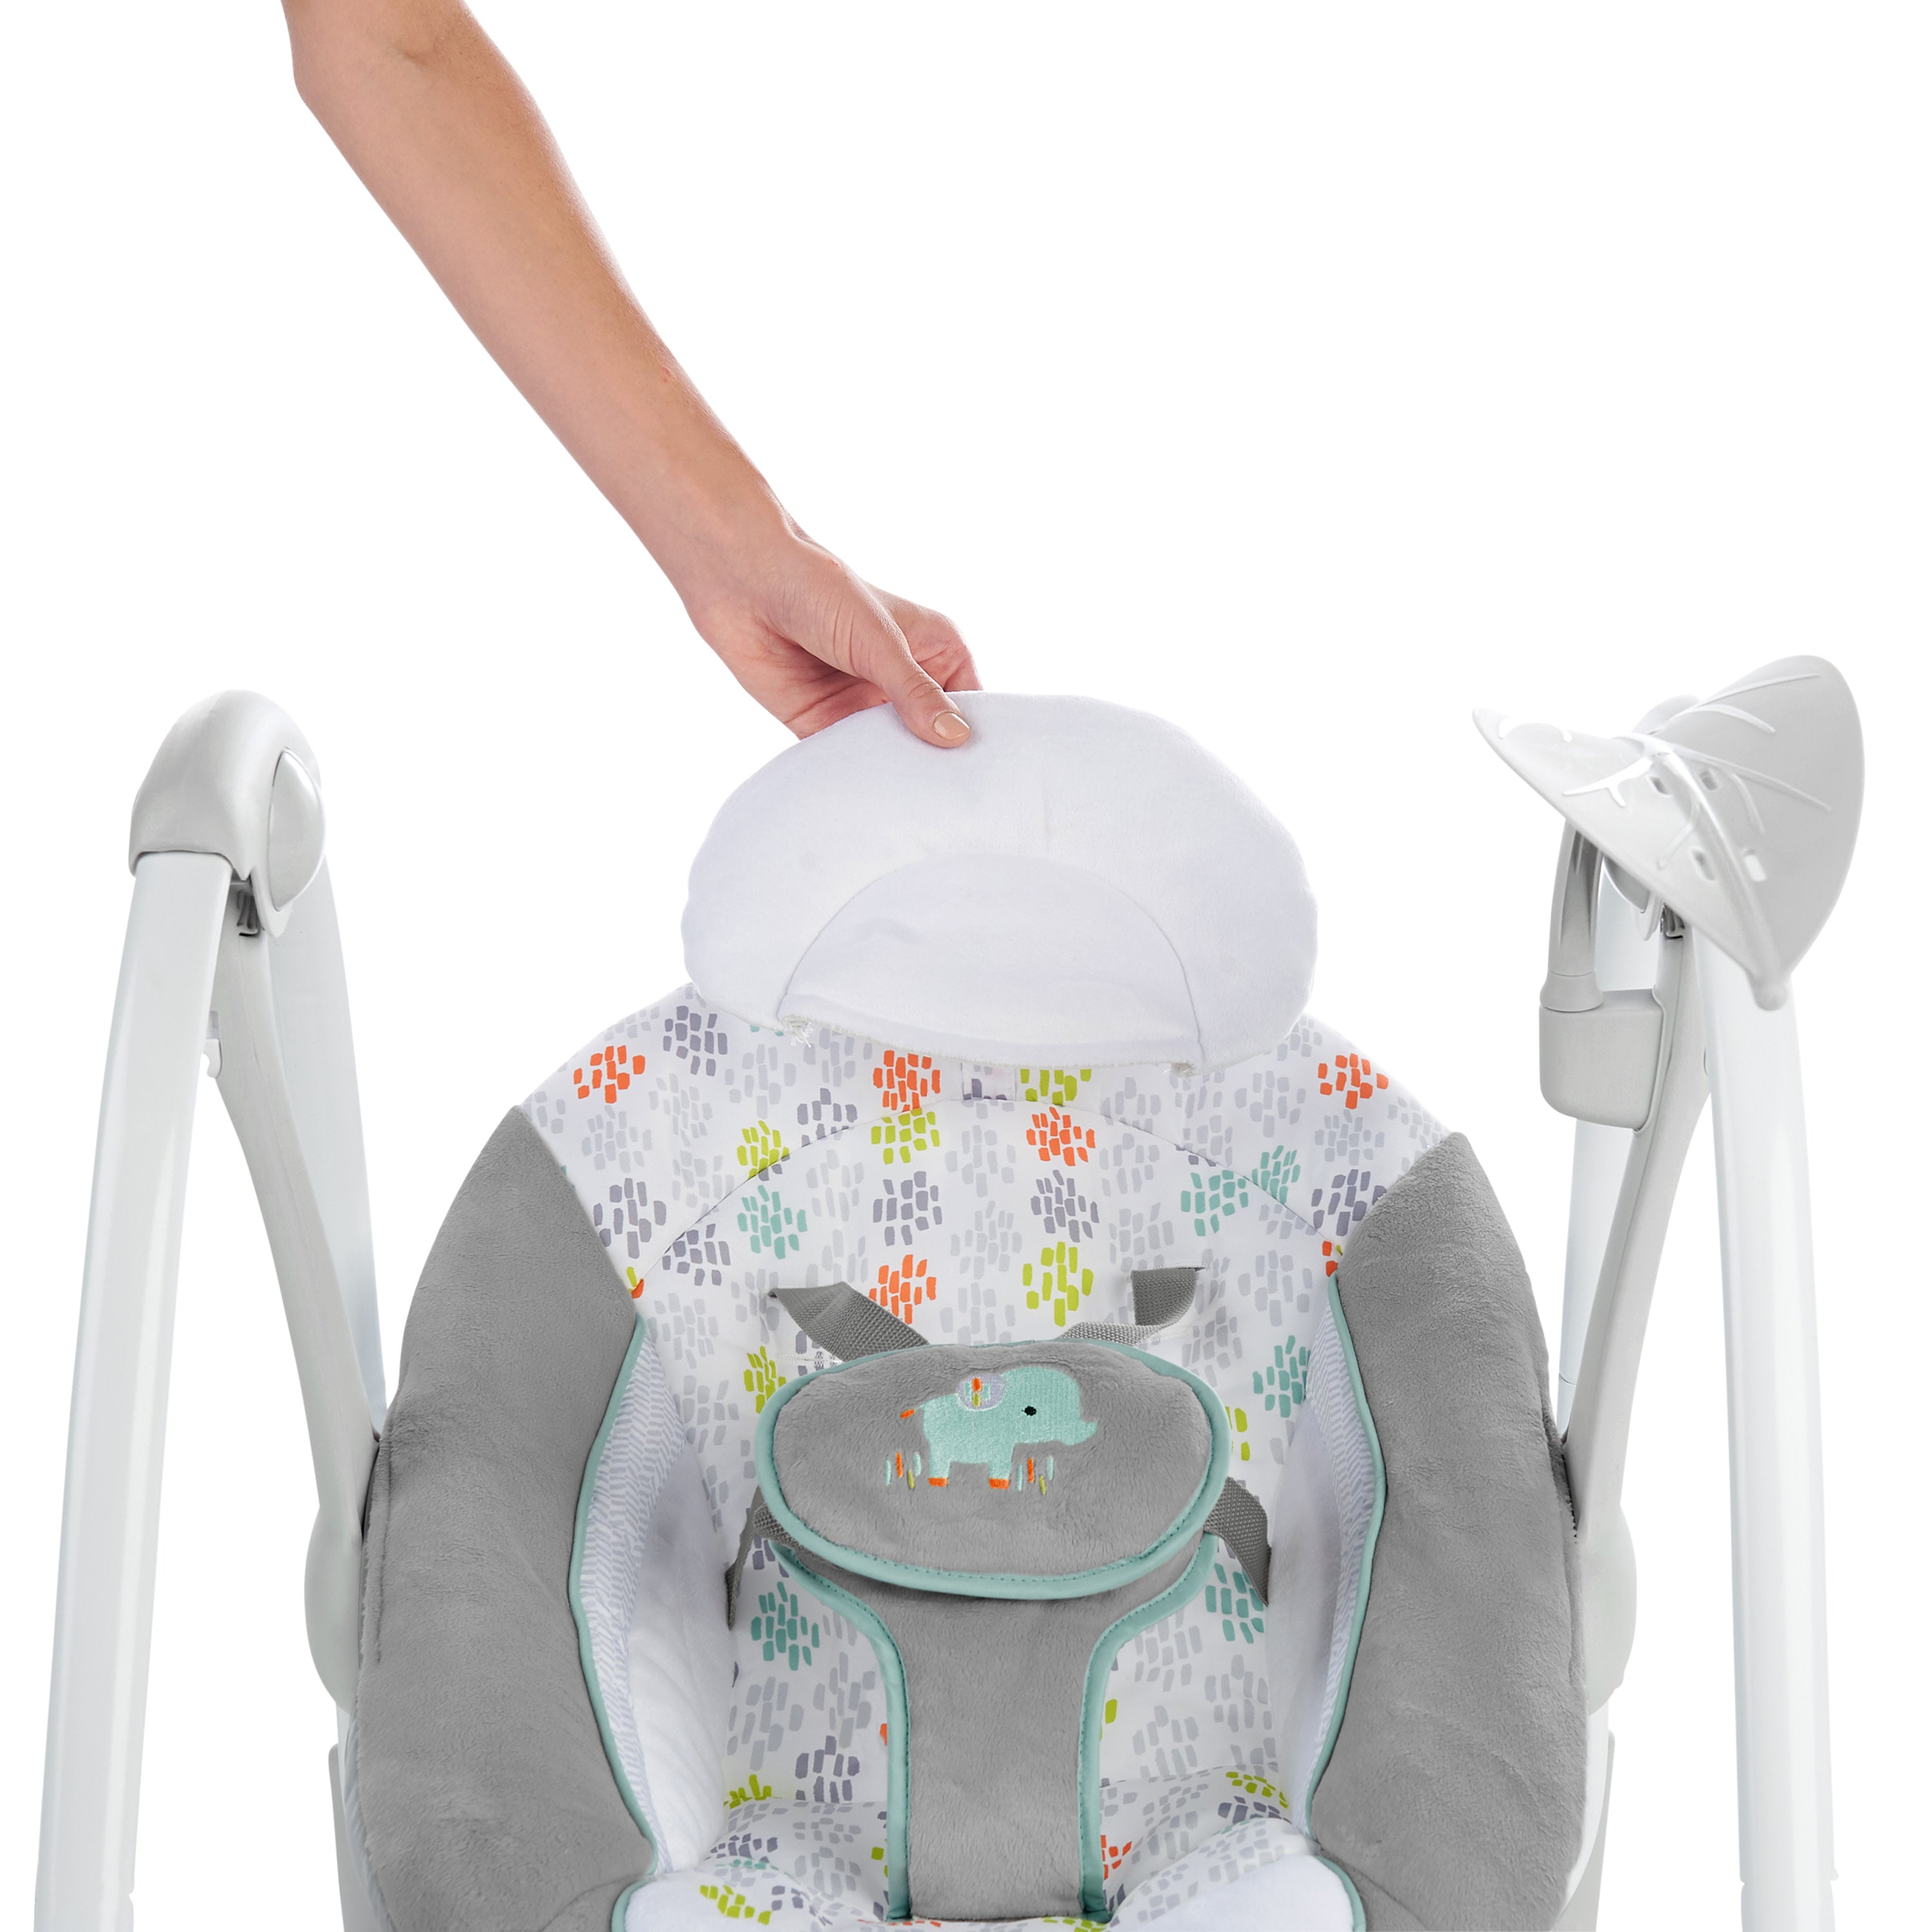 Ingenuity Convertme 2-in-1 Compact Portable Baby Swing 2 Infant